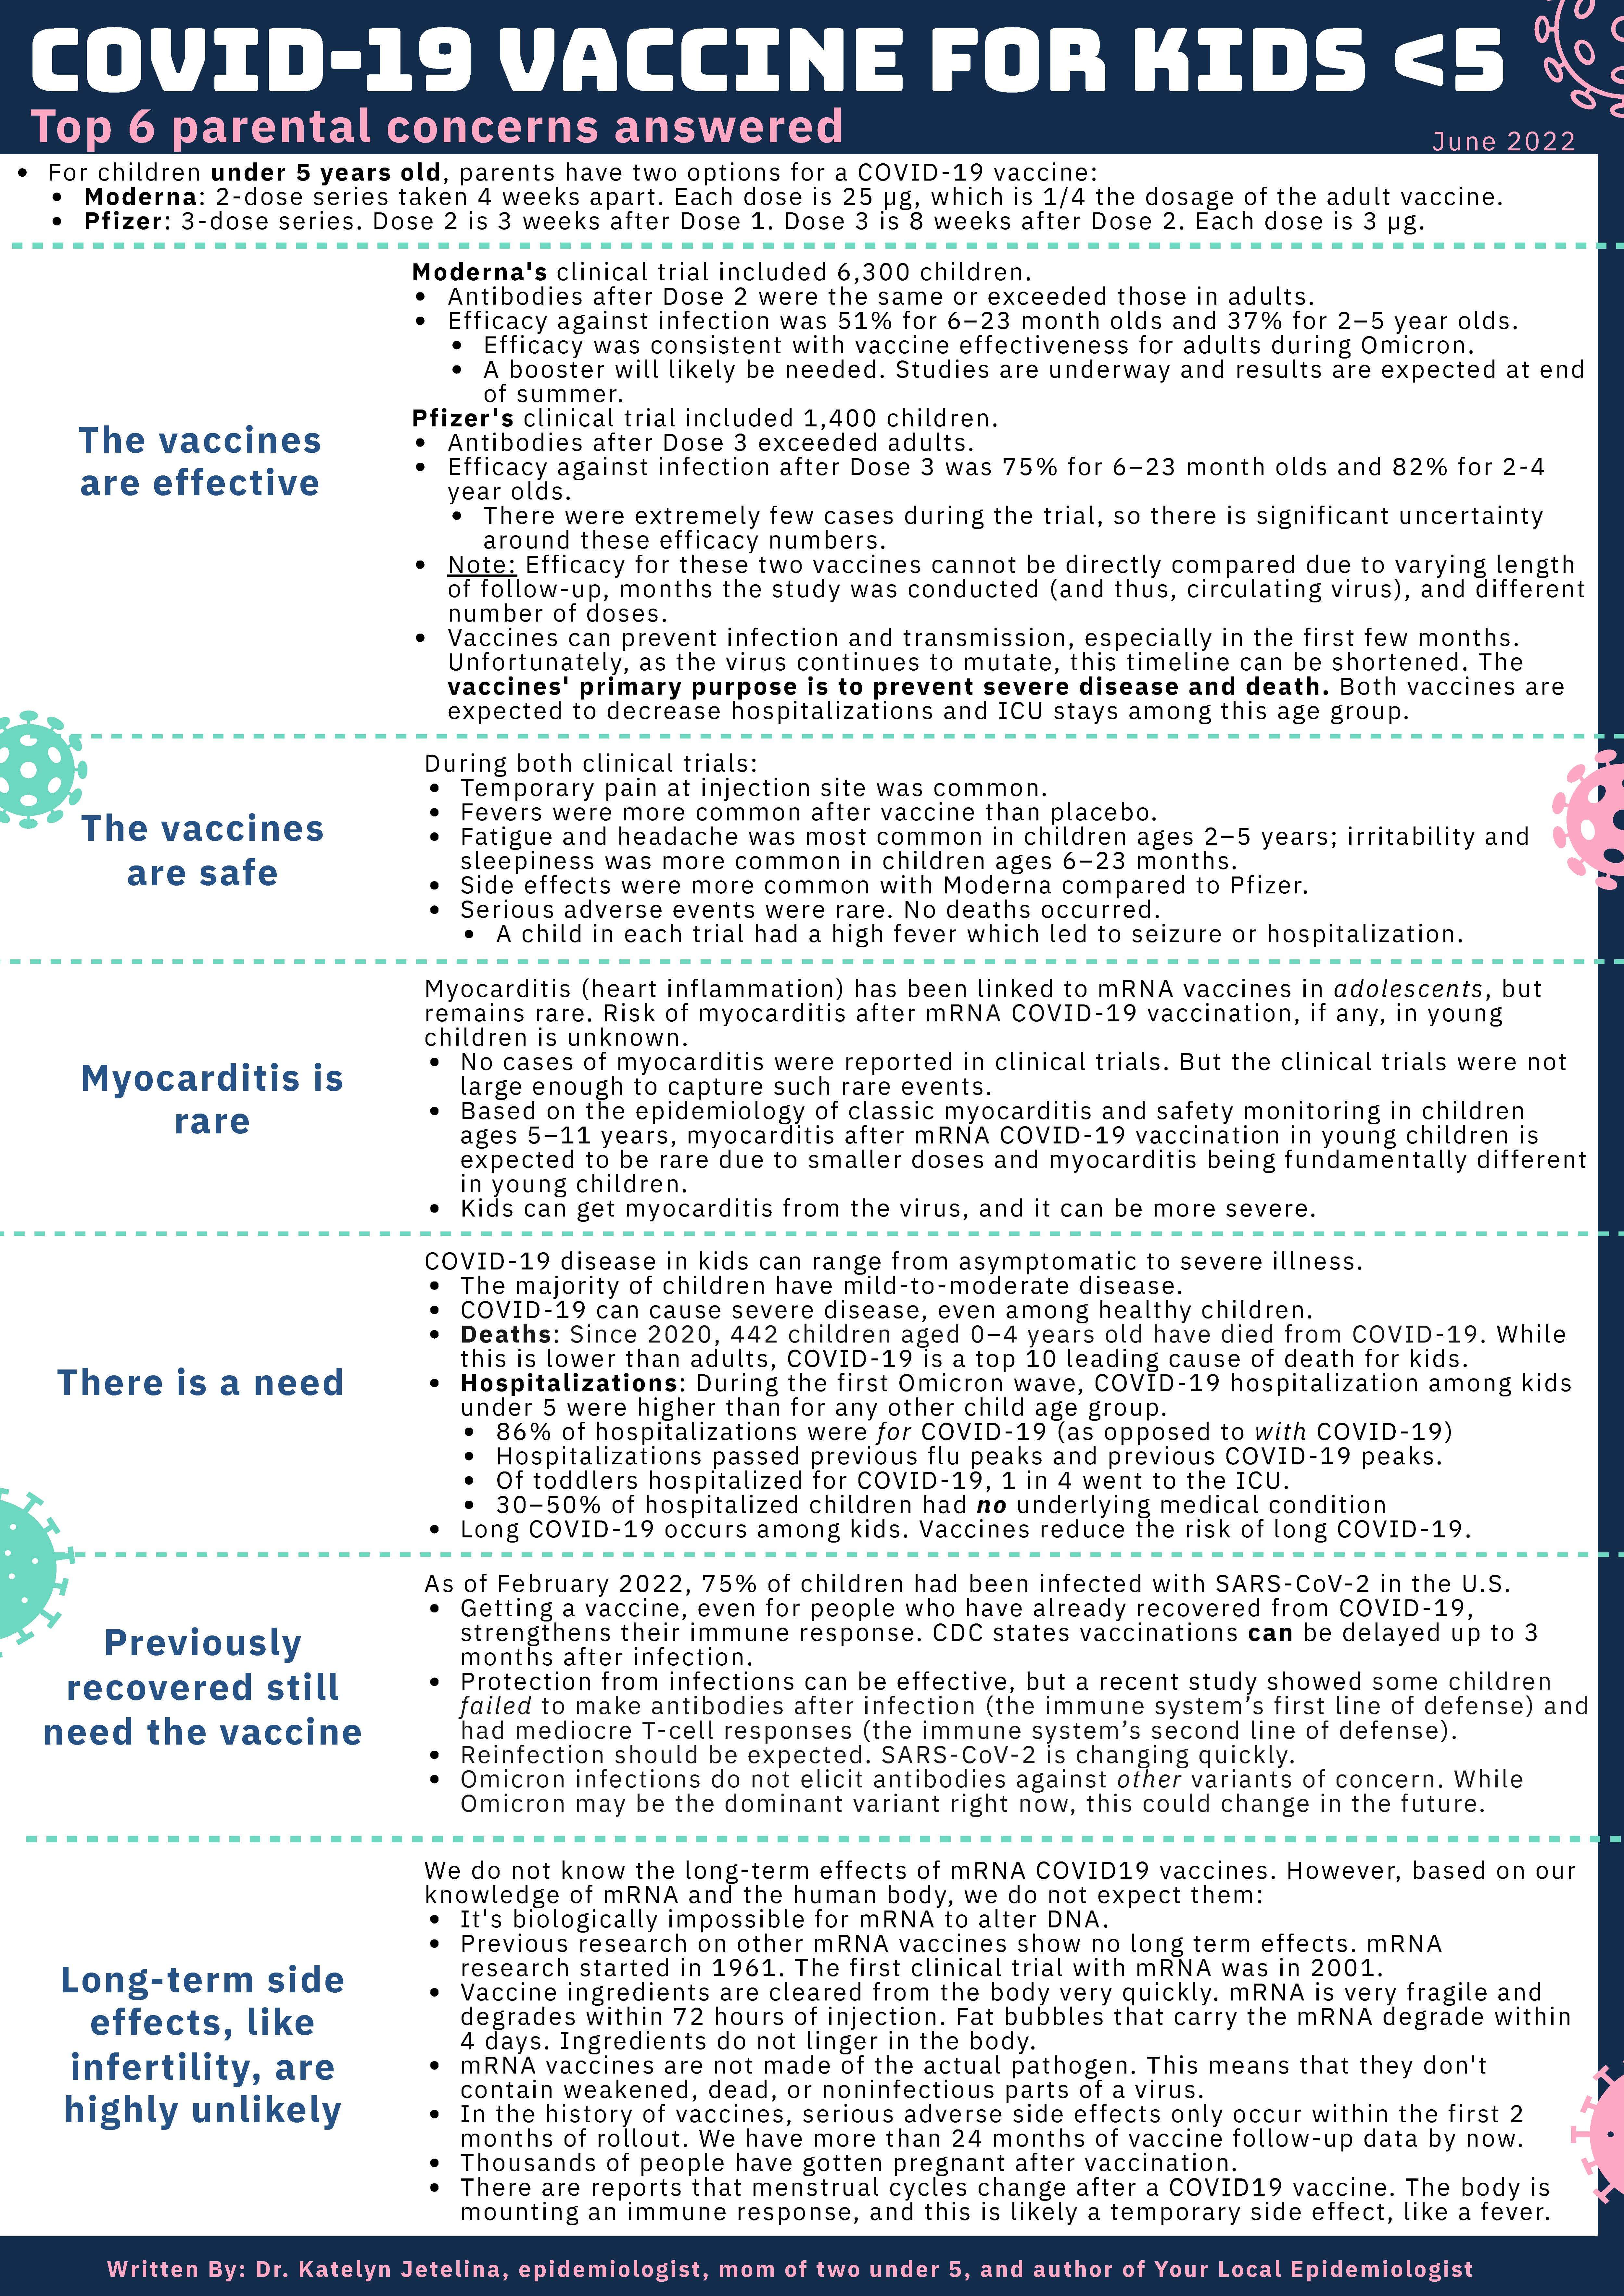 Your Local Epidemiologist's COVID-19 Vaccine Guide for Children Under 5